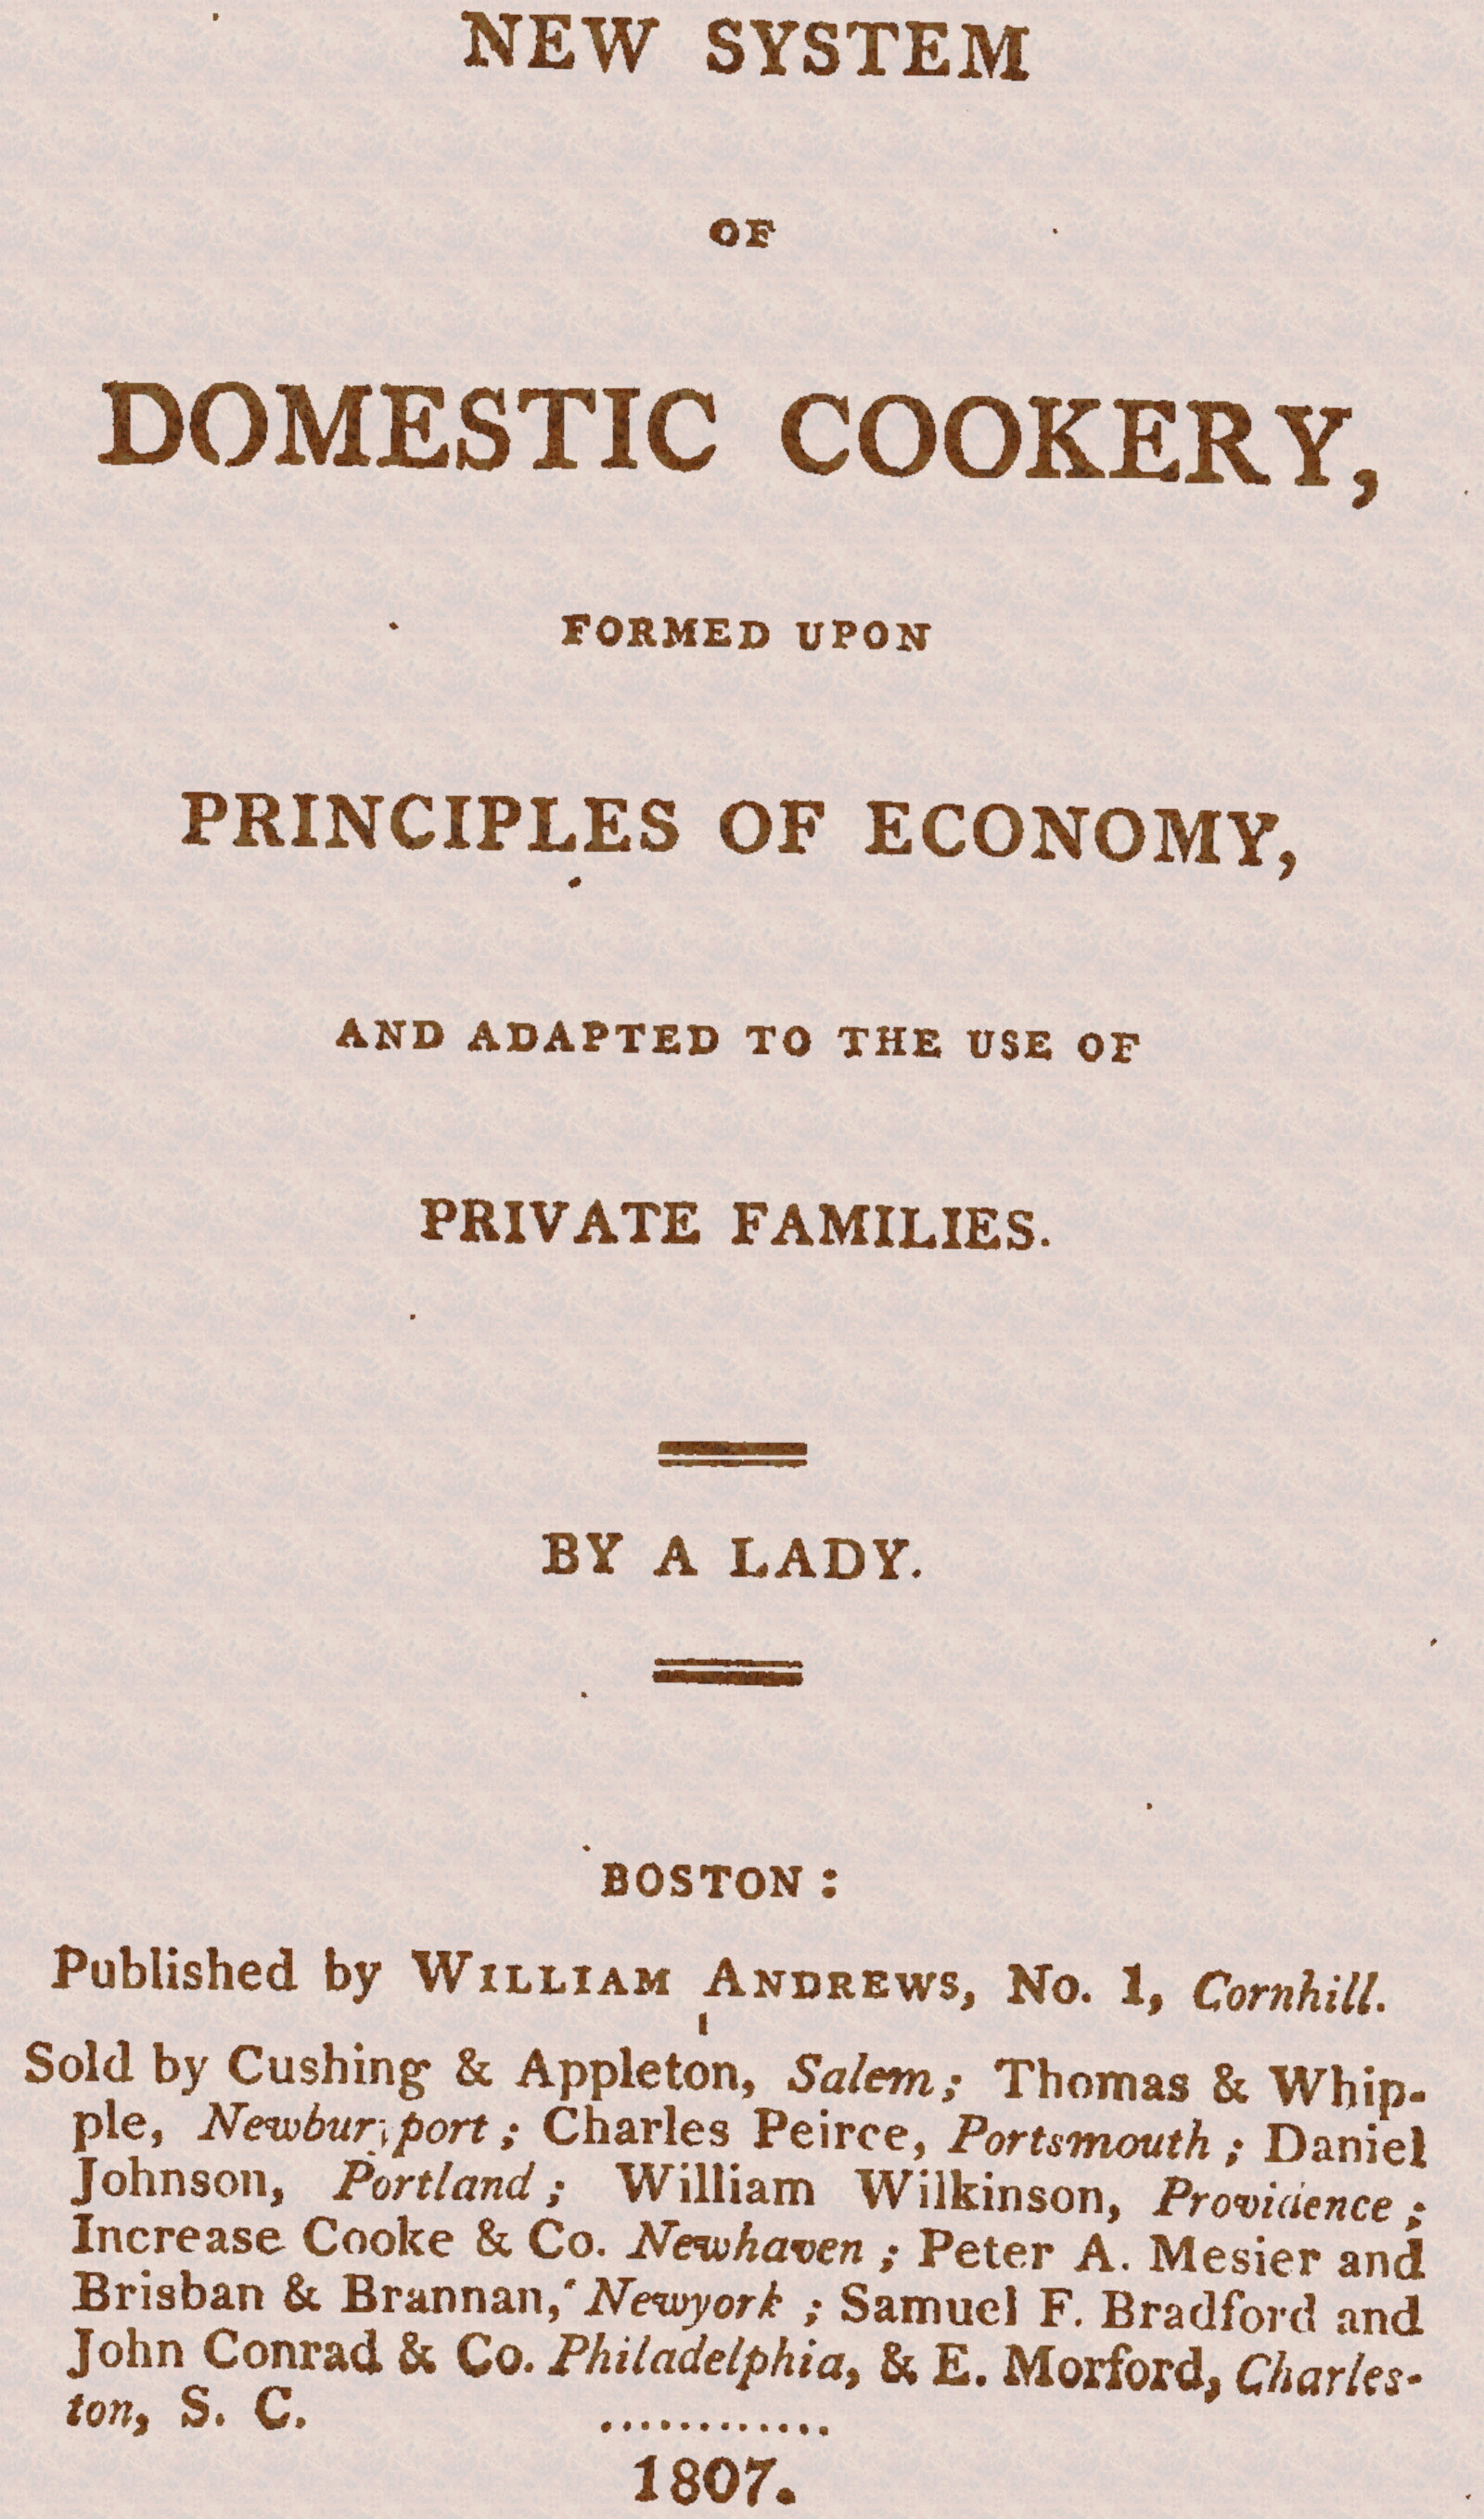 New system of domestic cookery, formed upon principles of economy, and adapted to the use of private families